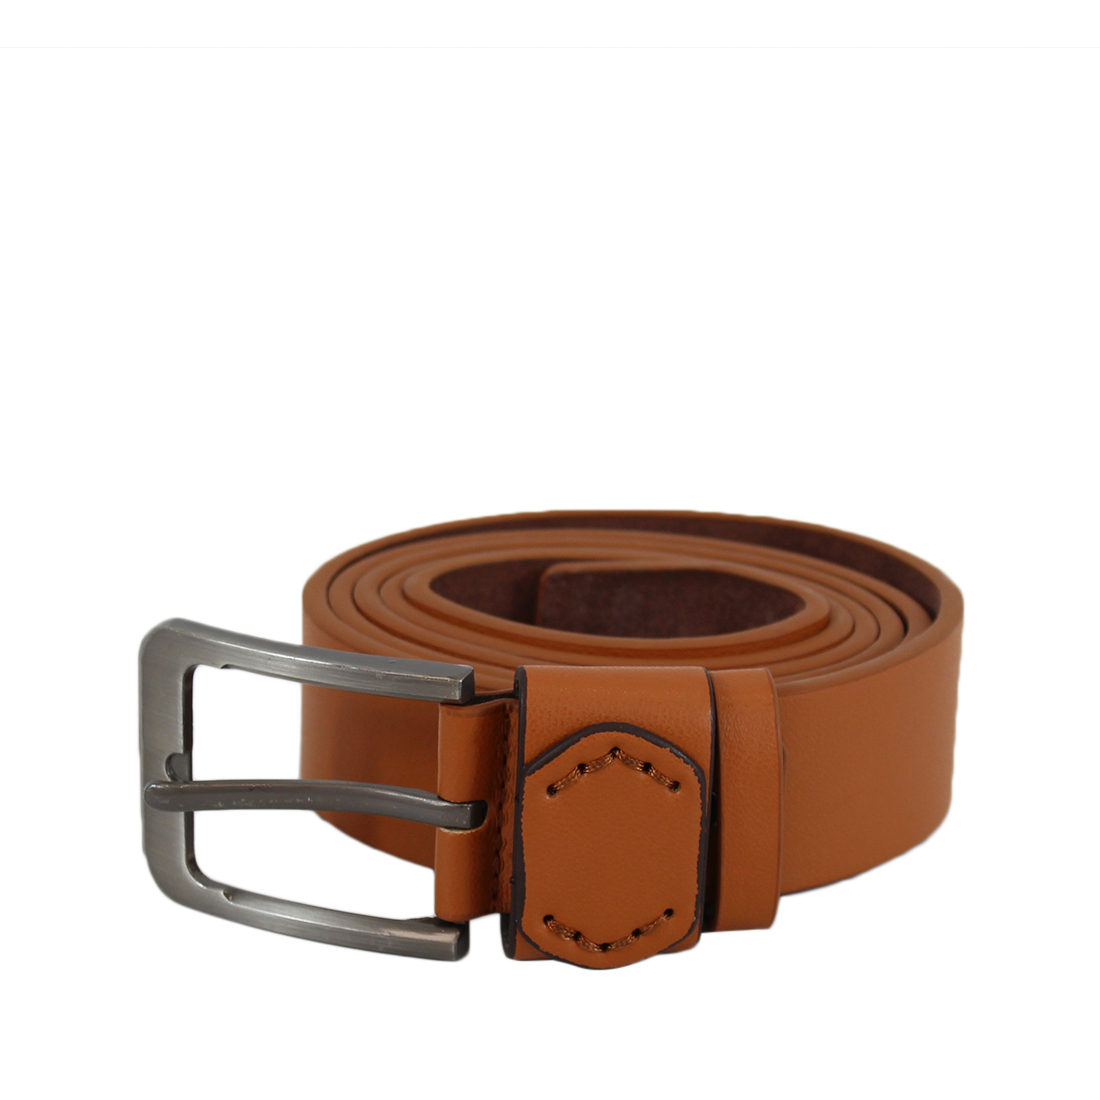 Plain wide leather belt with silver buckle